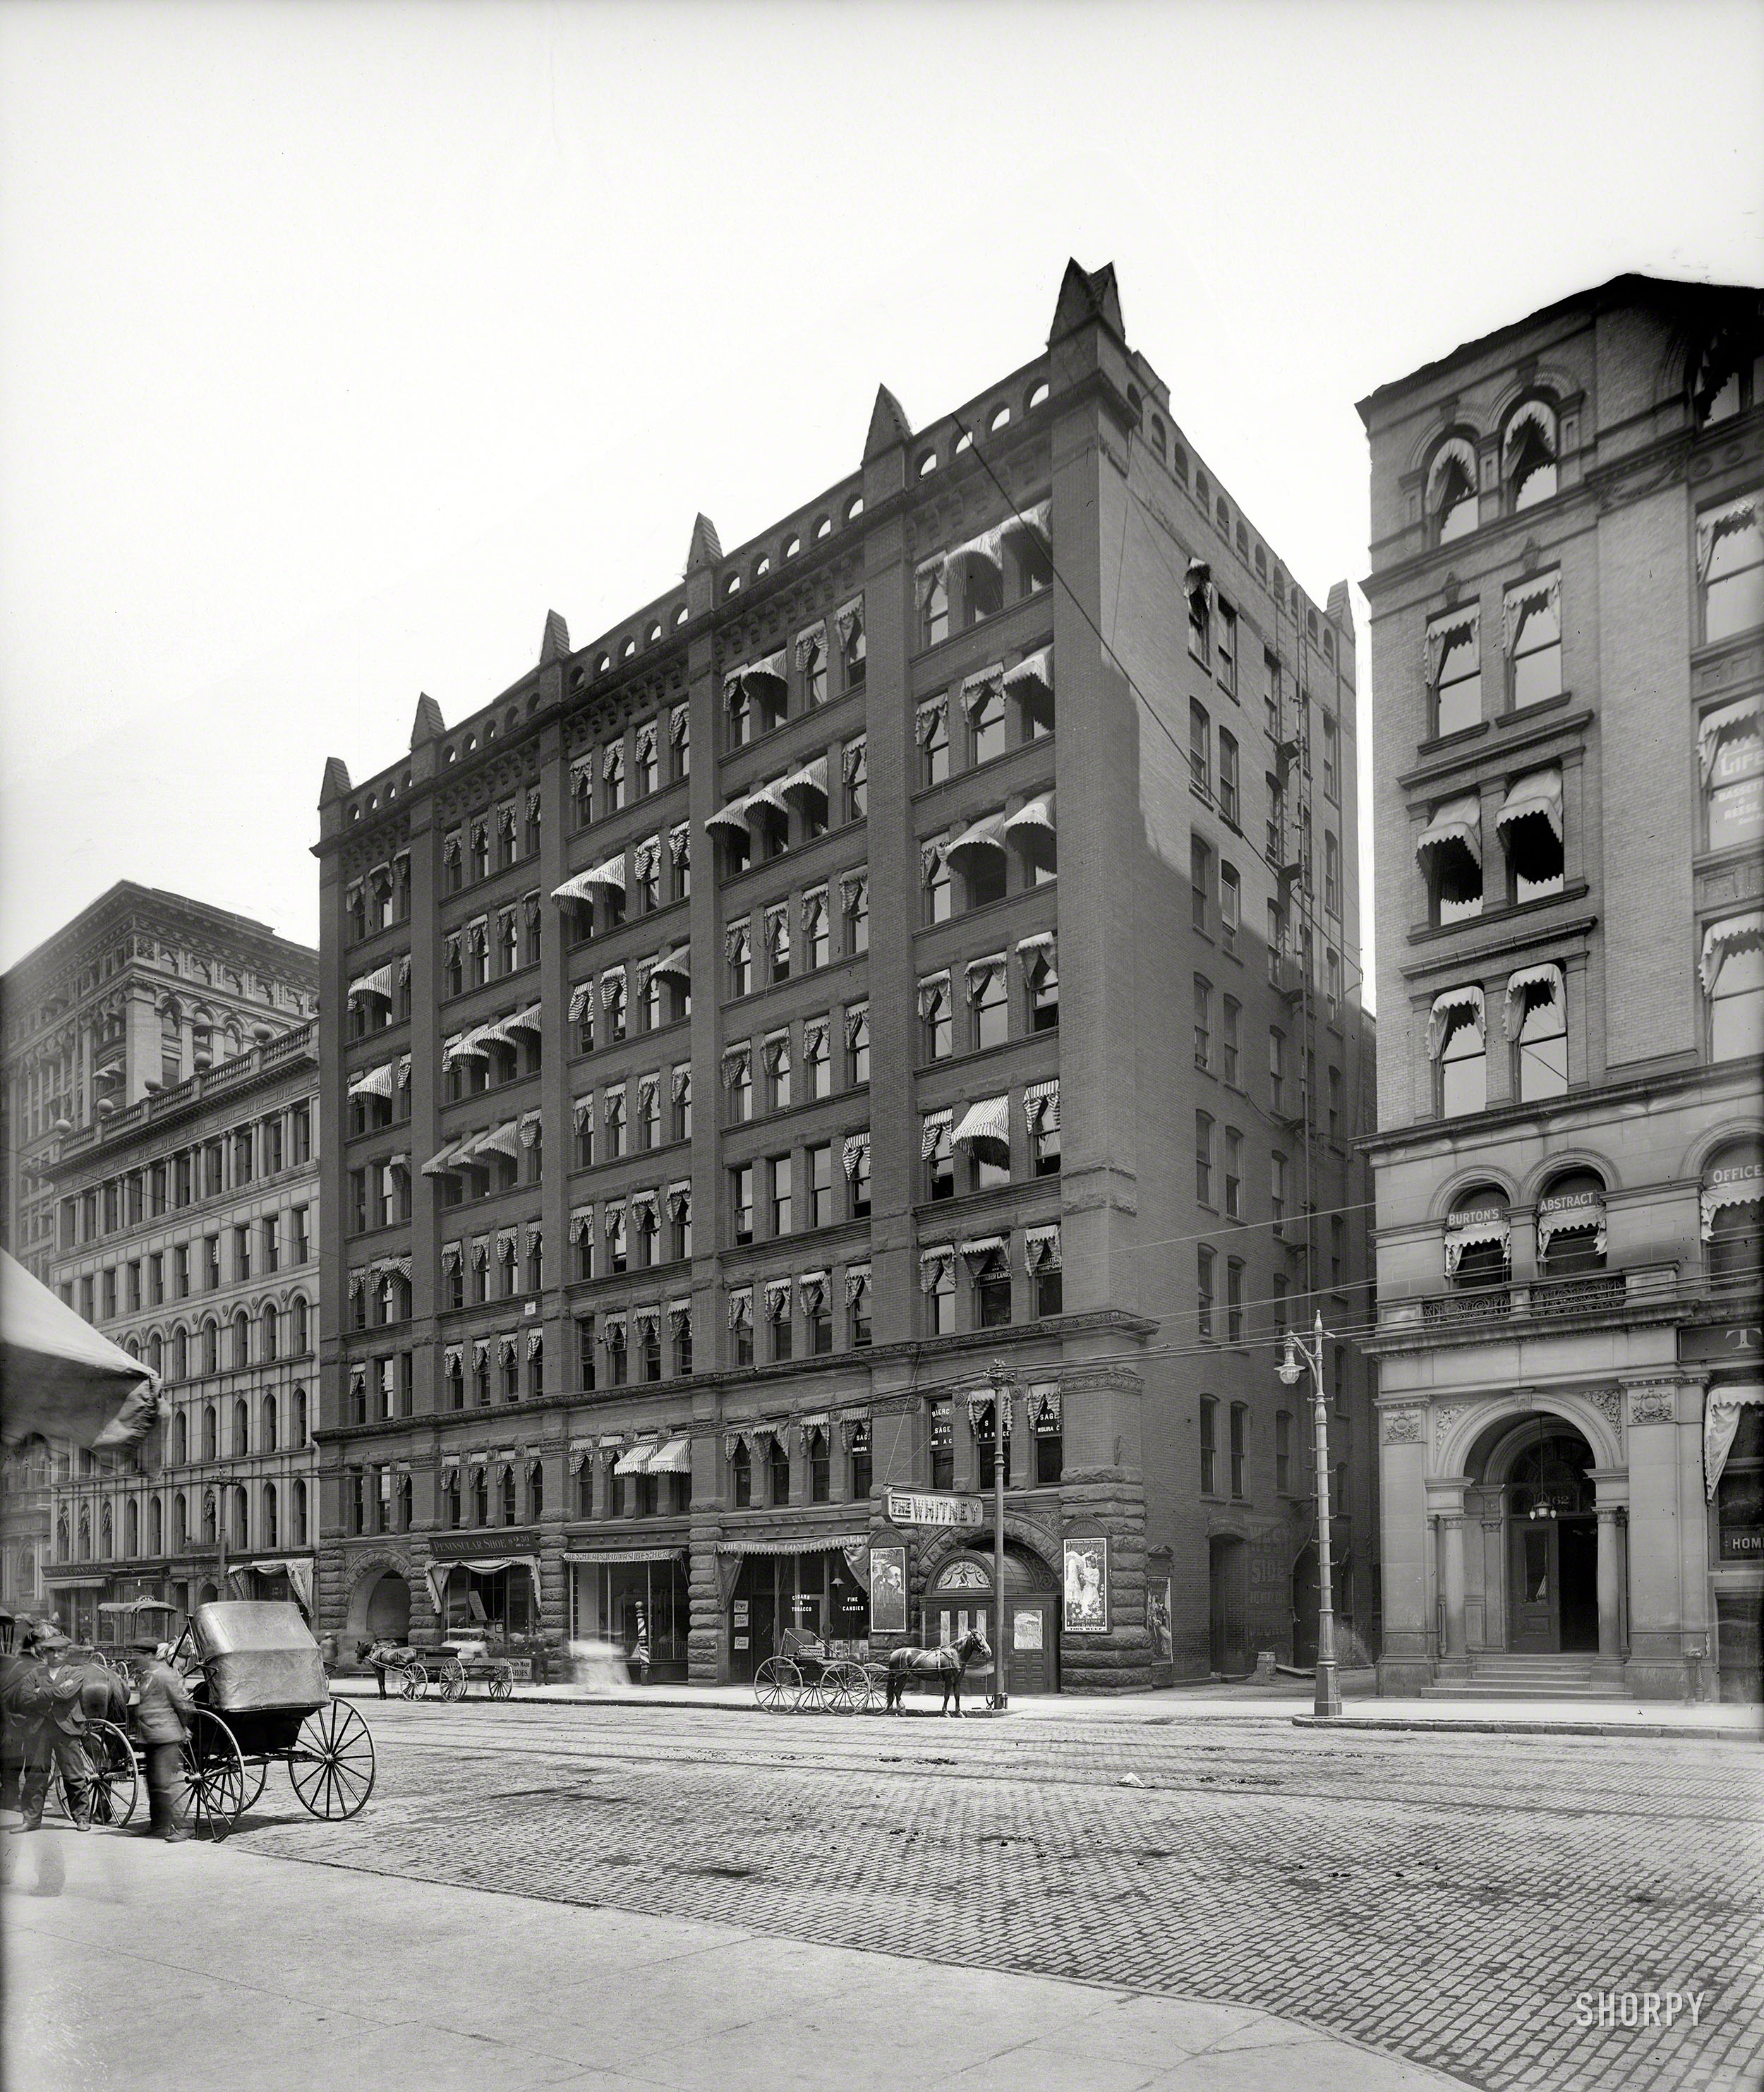 Detroit circa 1904. "Whitney Opera House." Now playing: Pauline Fletcher in the "sensational scenic melodrama A Hidden Crime." View full size.